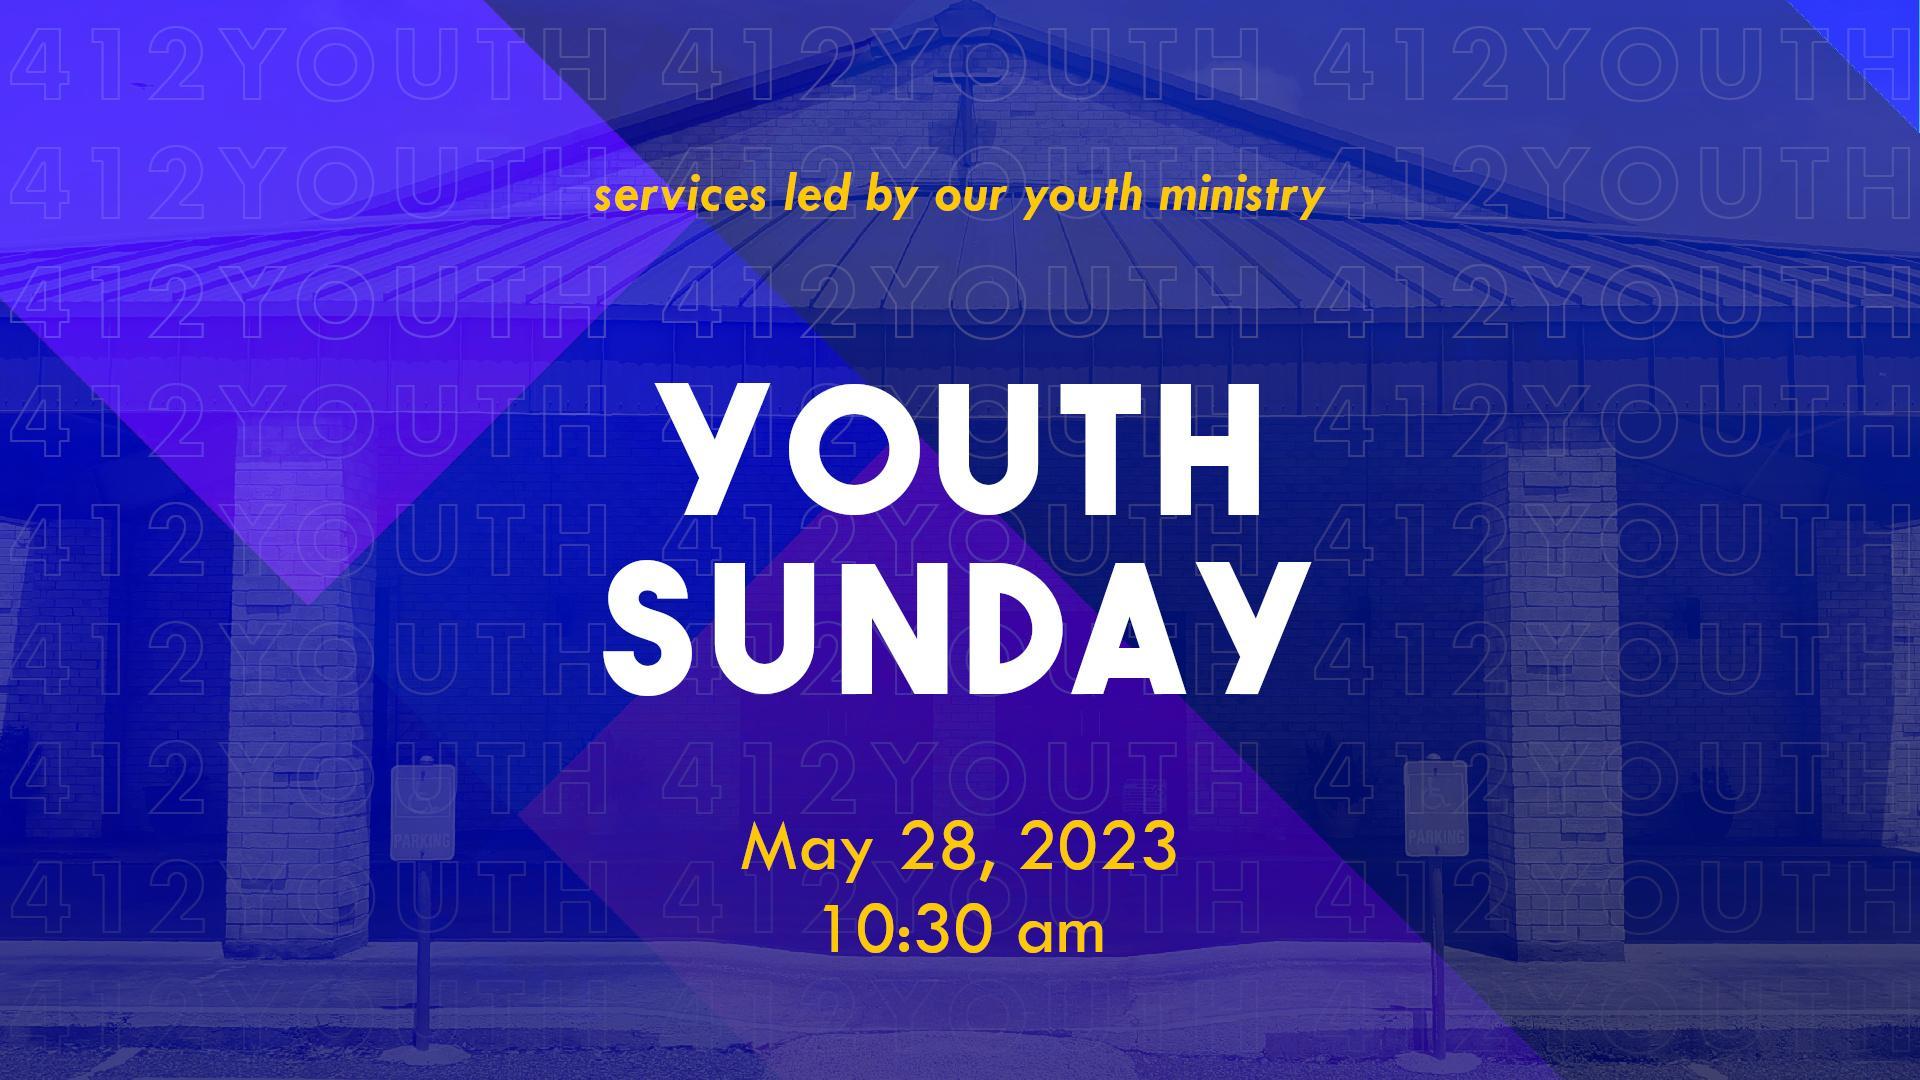 Youth Sunday is when 412 Youth will lead Sunday worship on May 28, 2023